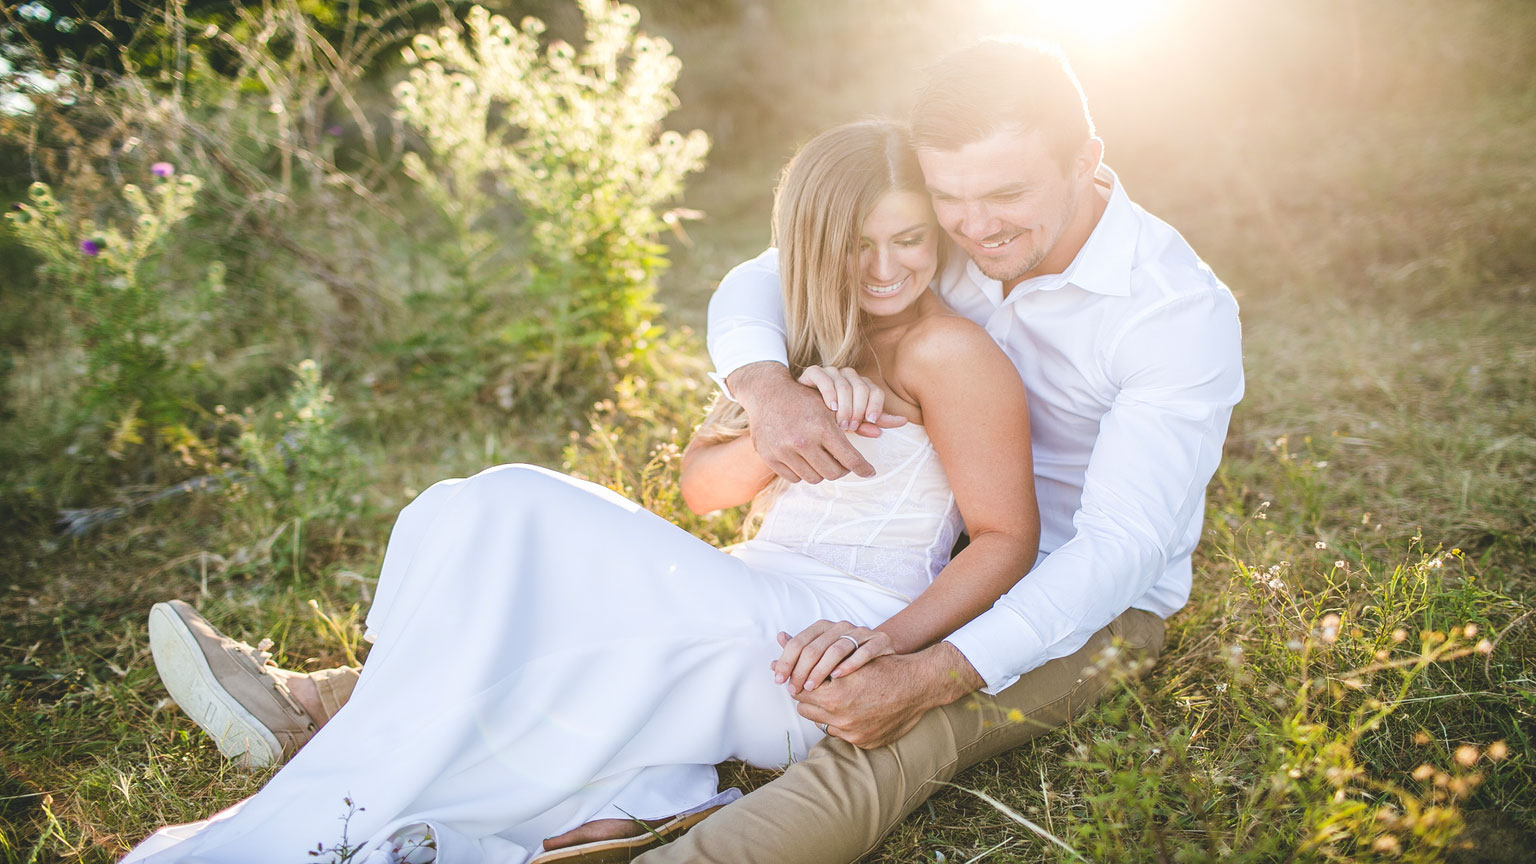 Chelsea and Wayde met at 13, married on her family farm in 2012, and then sacrificed their honeymoon to save for their dream home.